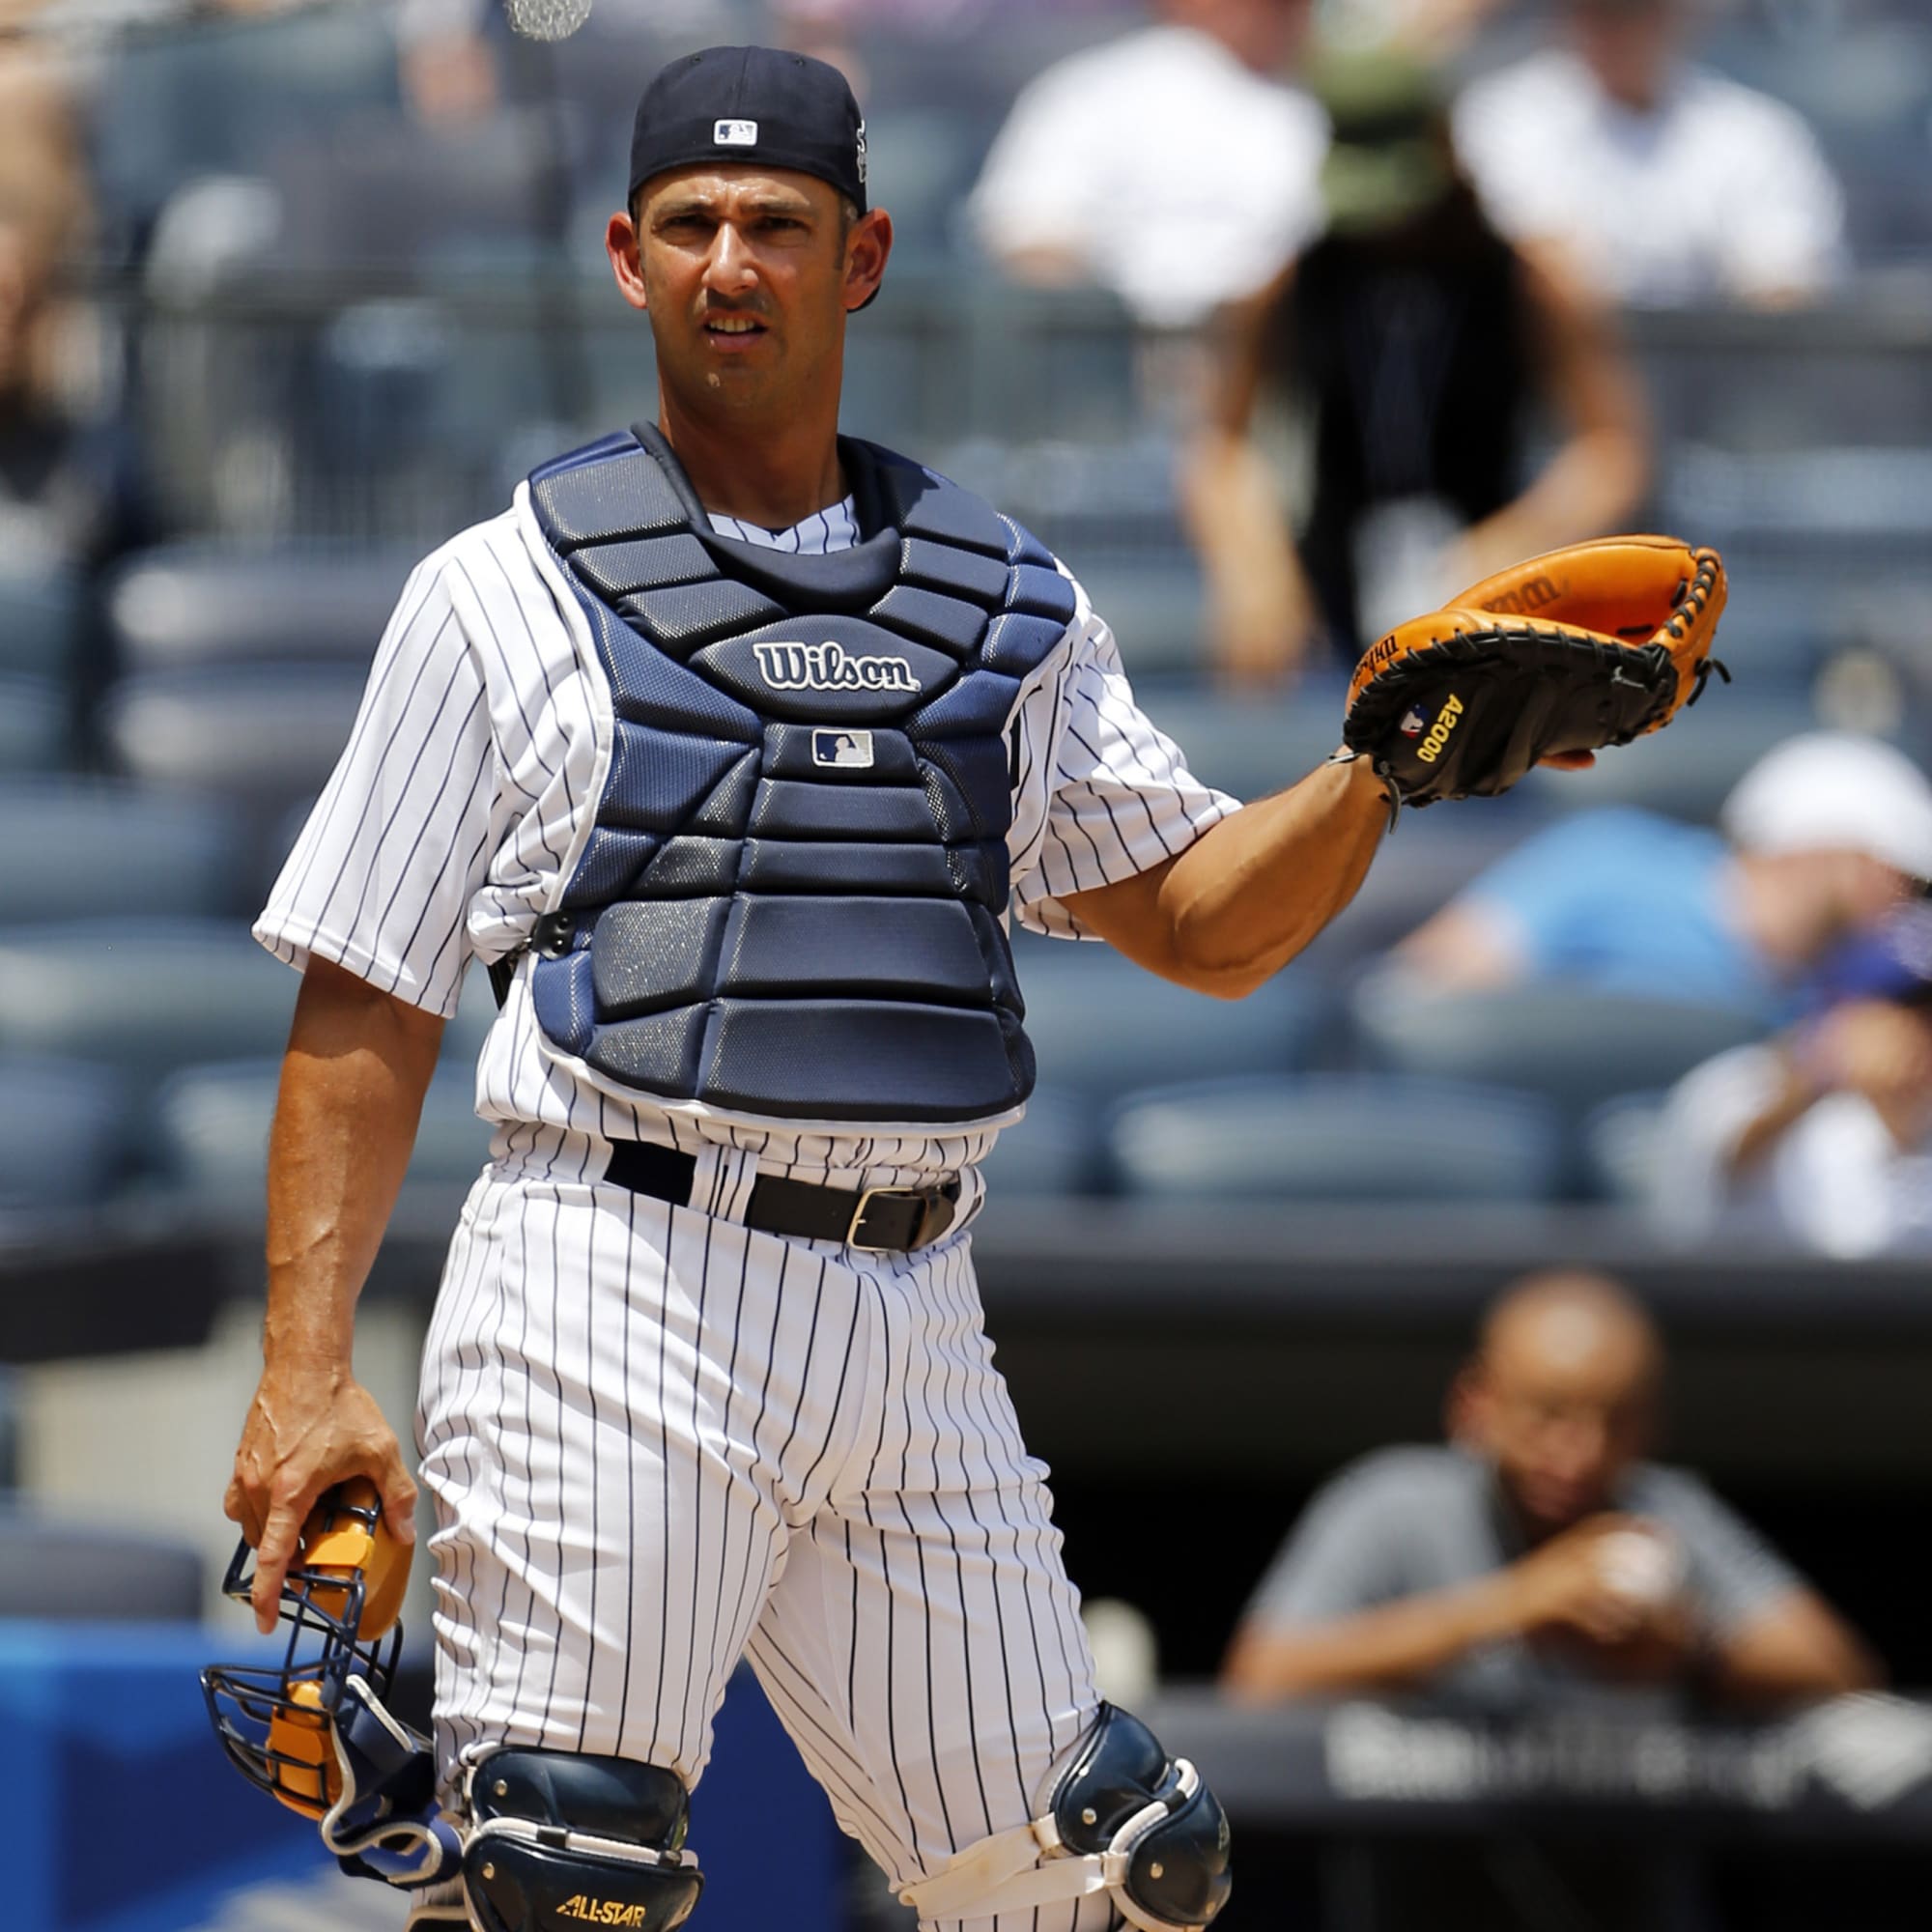 Yankees: Has Jorge Posada been lying about his age all this time?